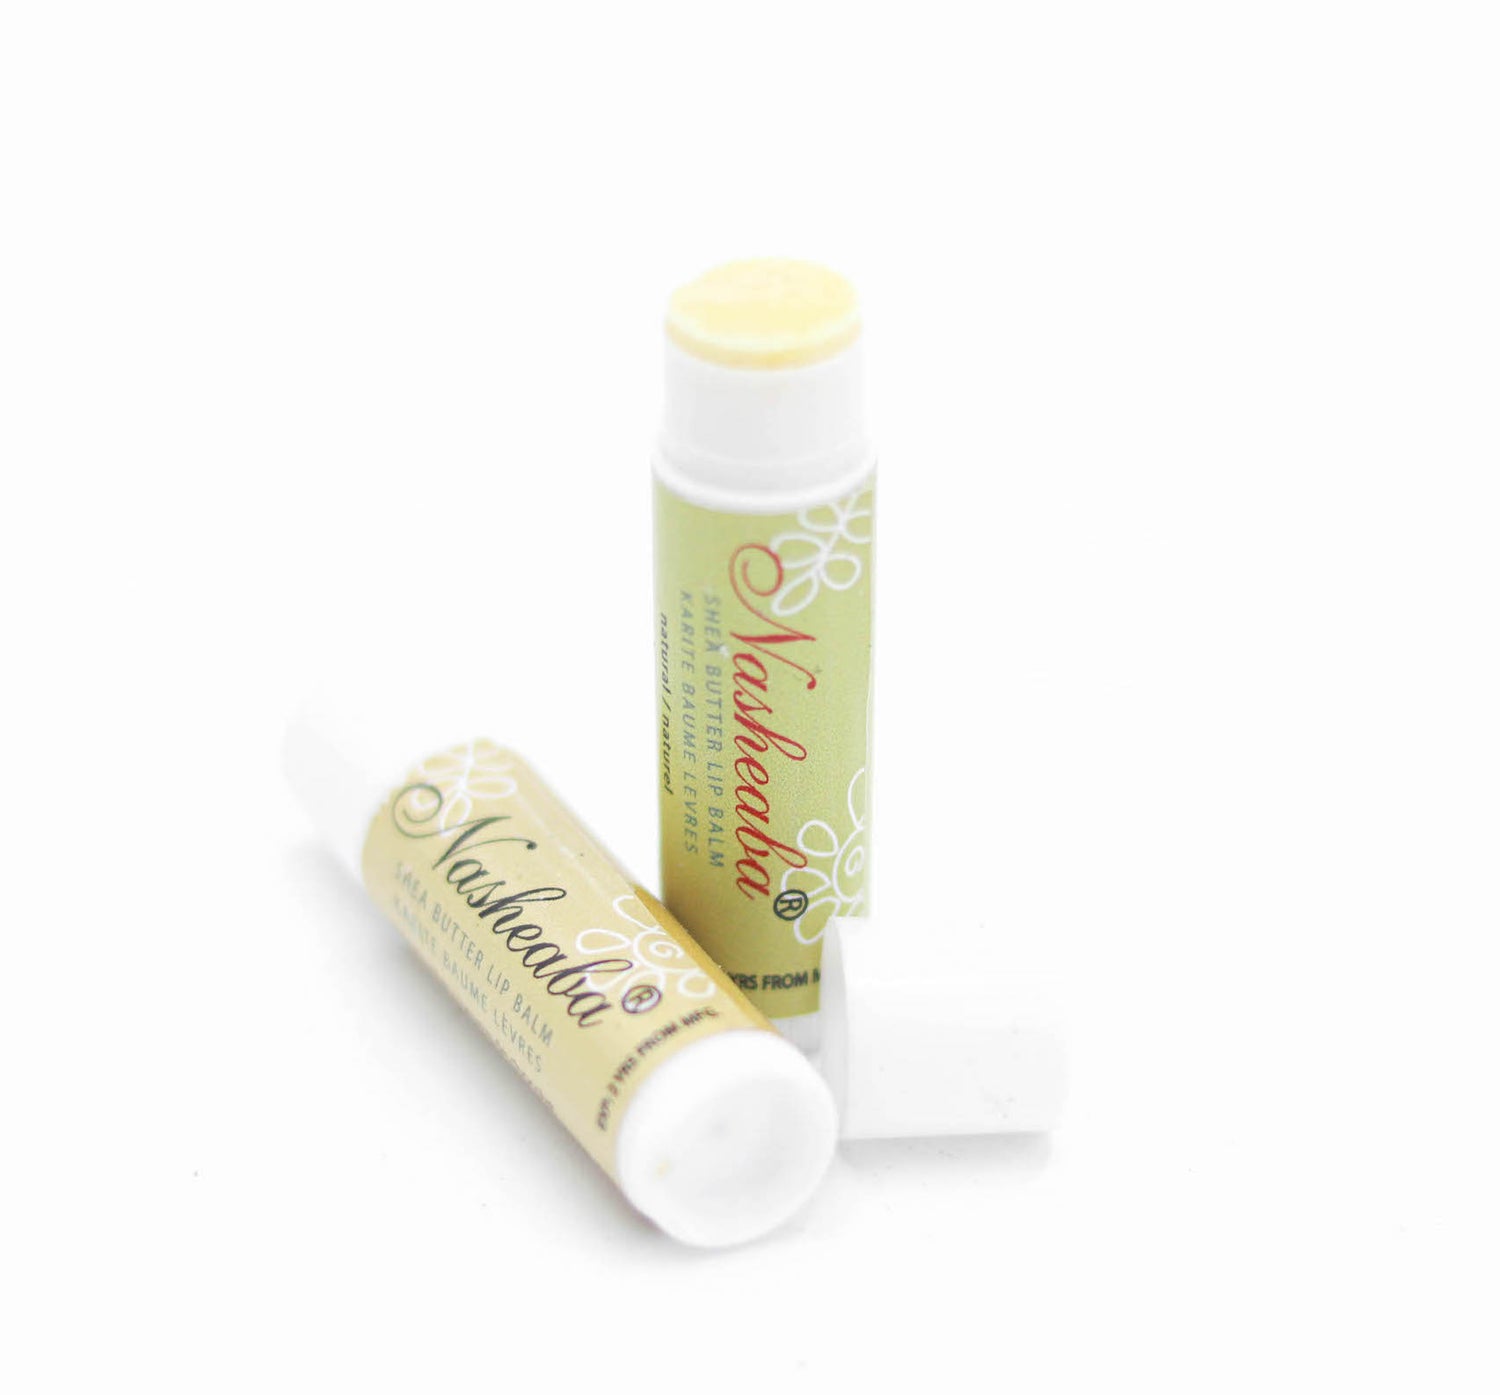 Two chapsticks made form ethically sourced shea butter. One with a lid and one without. 